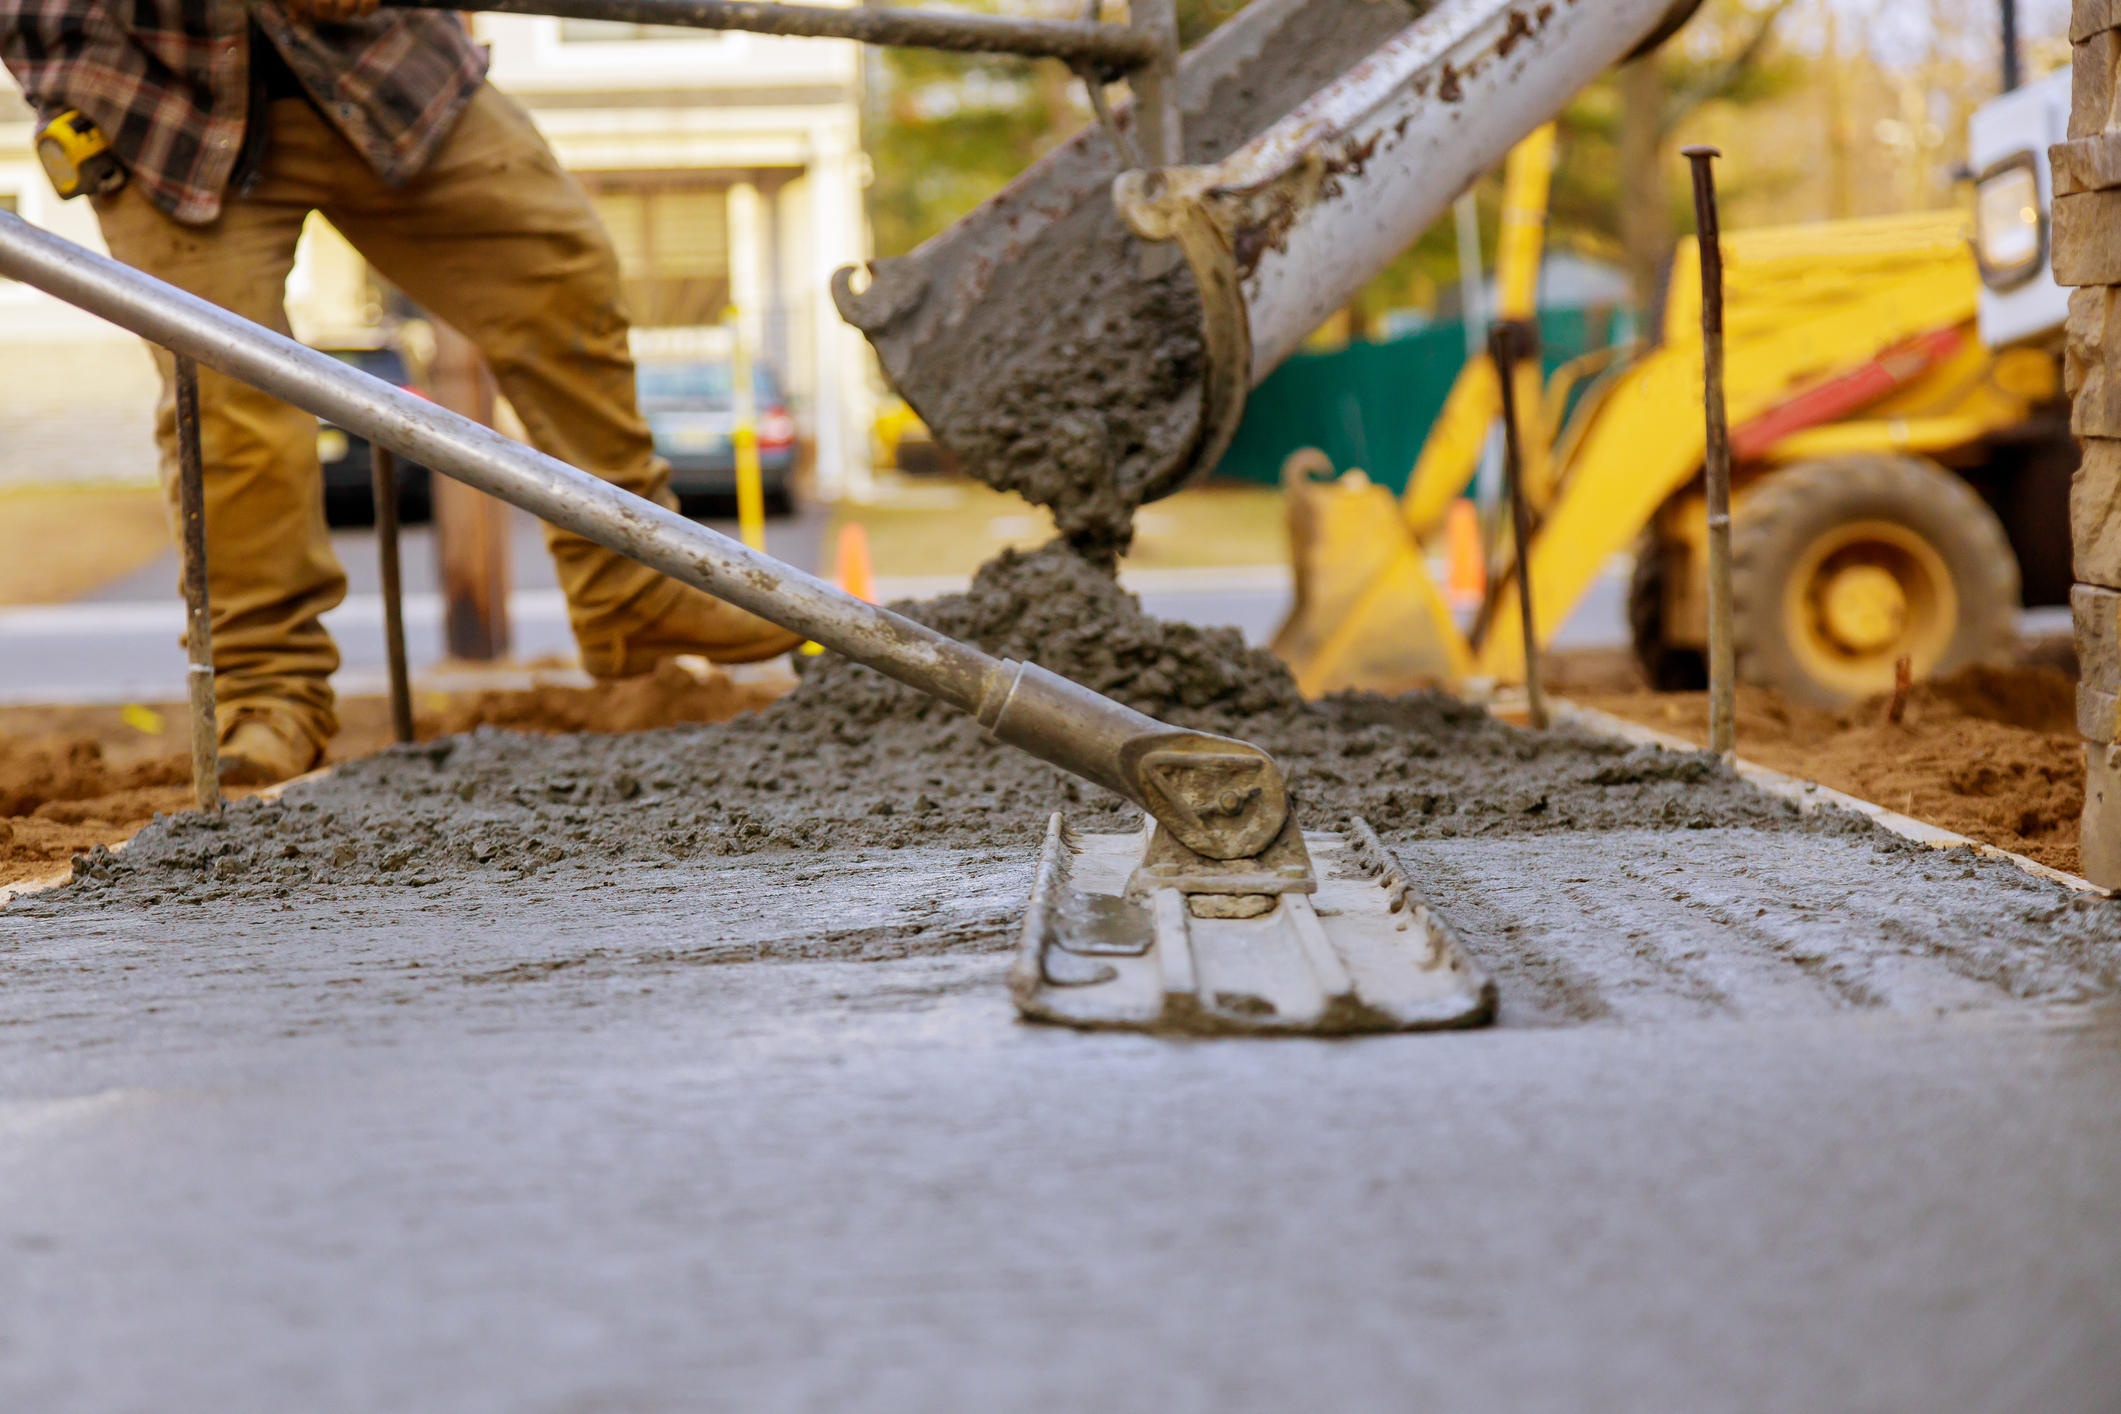 Whether your project involves laying a concrete foundation for new construction, removal and replacement of deteriorated surfaces, or laying a new driveway, sidewalk or patio, HQ Asphalt & Concrete has you covered. We service commercial projects, as well as residential, and our expert concrete contractors are experienced in a wide variety of concrete paving